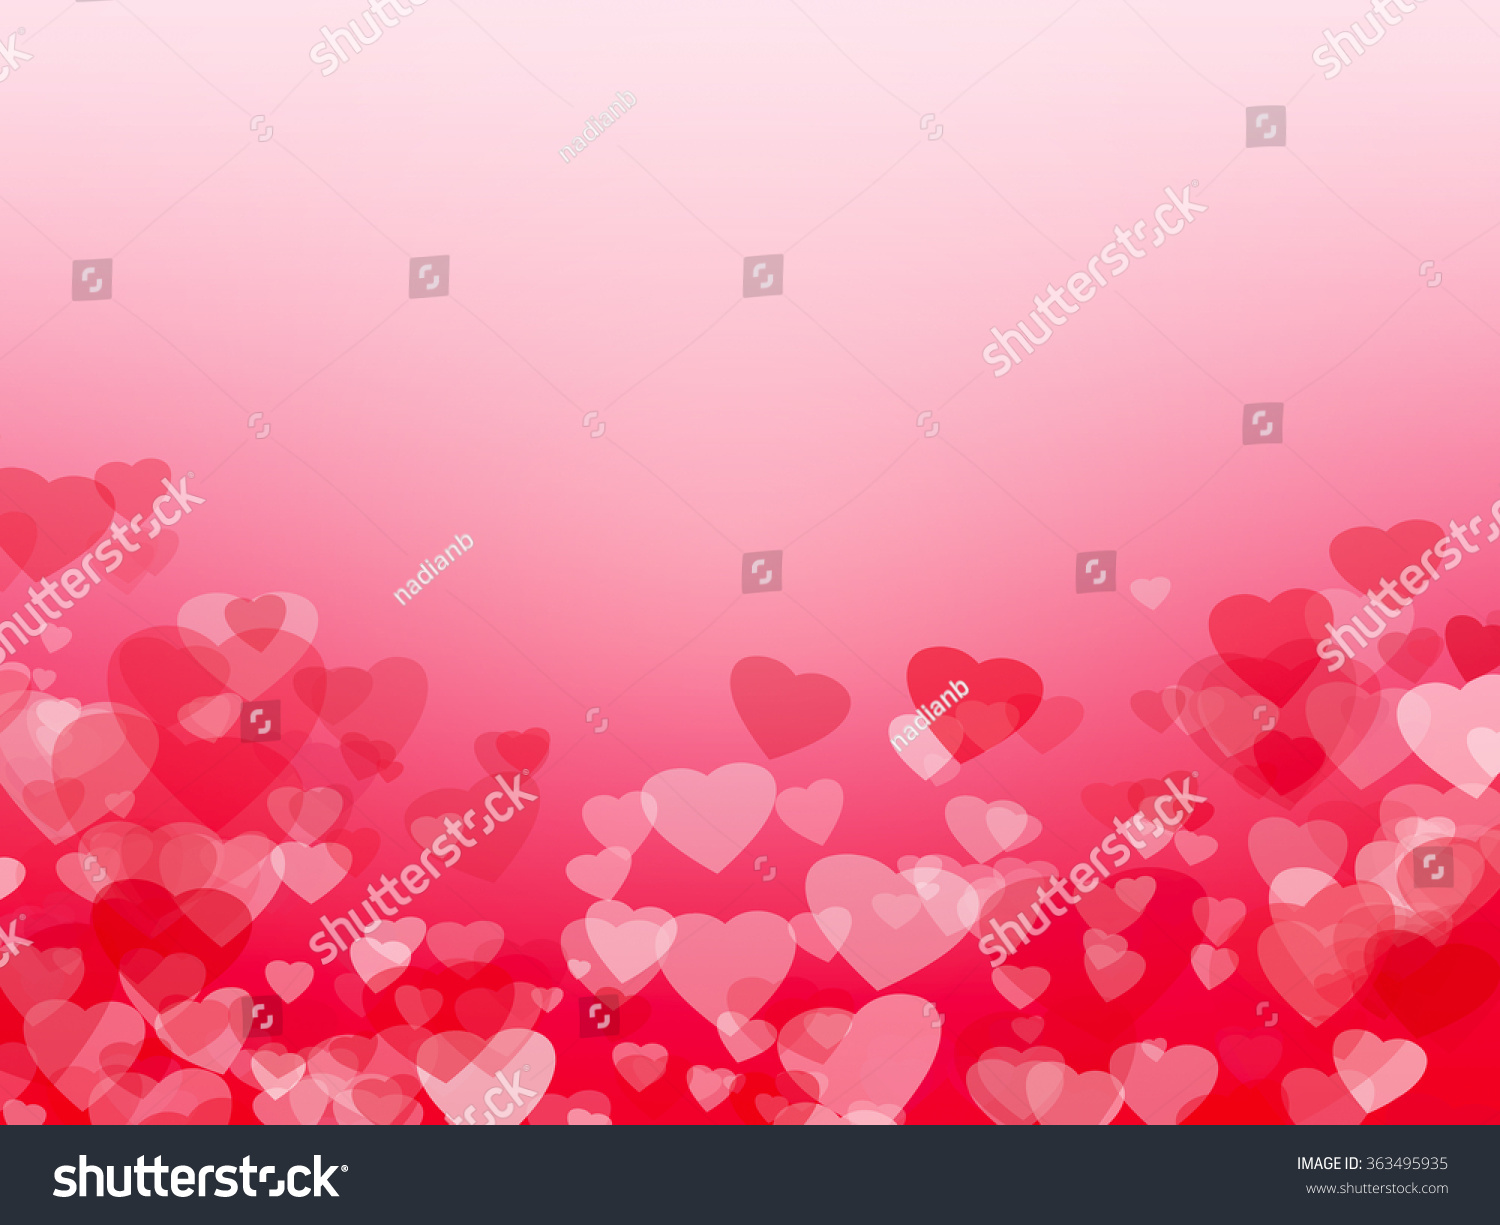 Background with red and white hearts. Symbol of love, copy space. #363495935